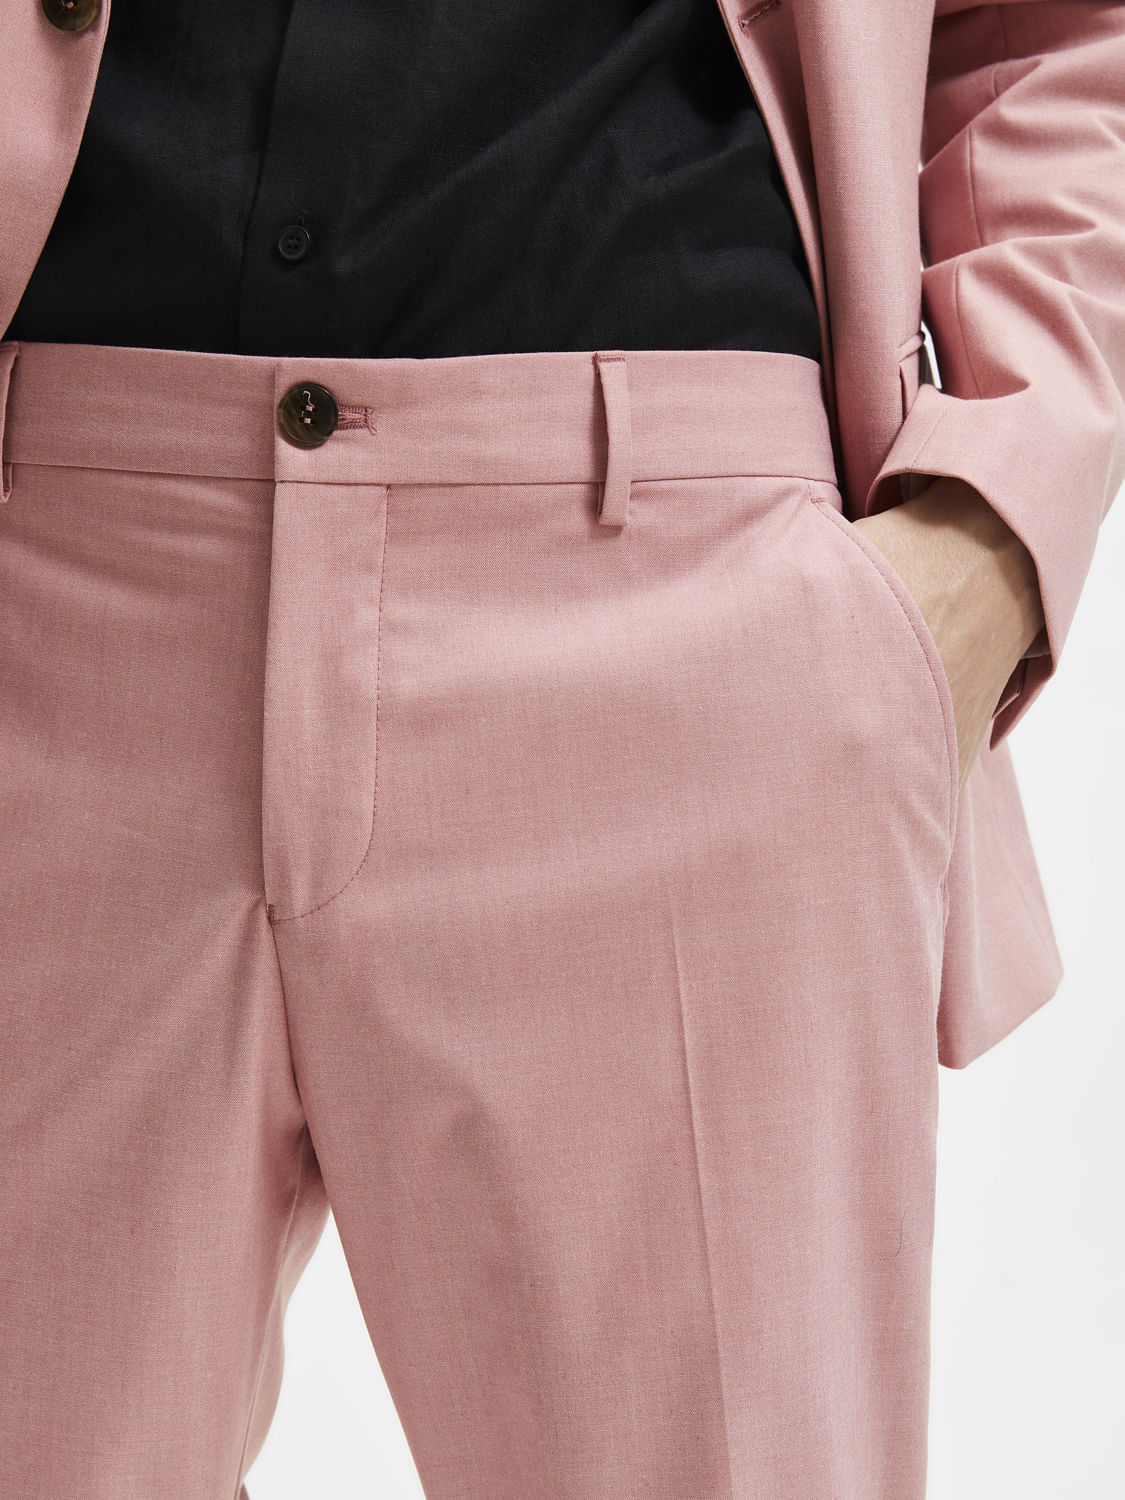 Harlequin Rose Pink Trousers  Libby London